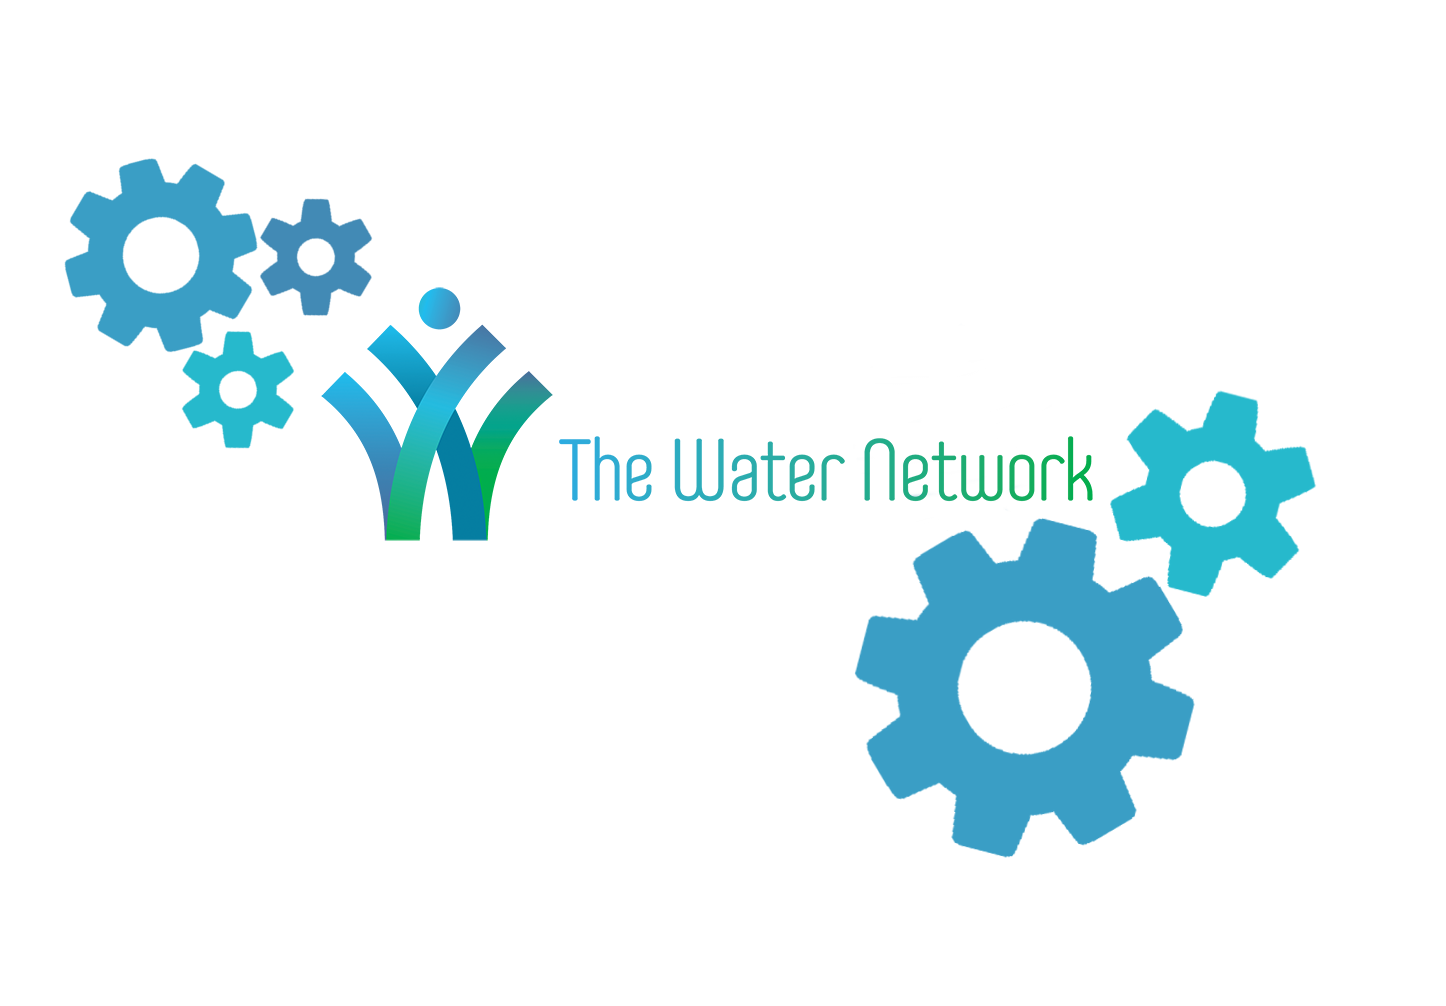 How to Use The Water Network